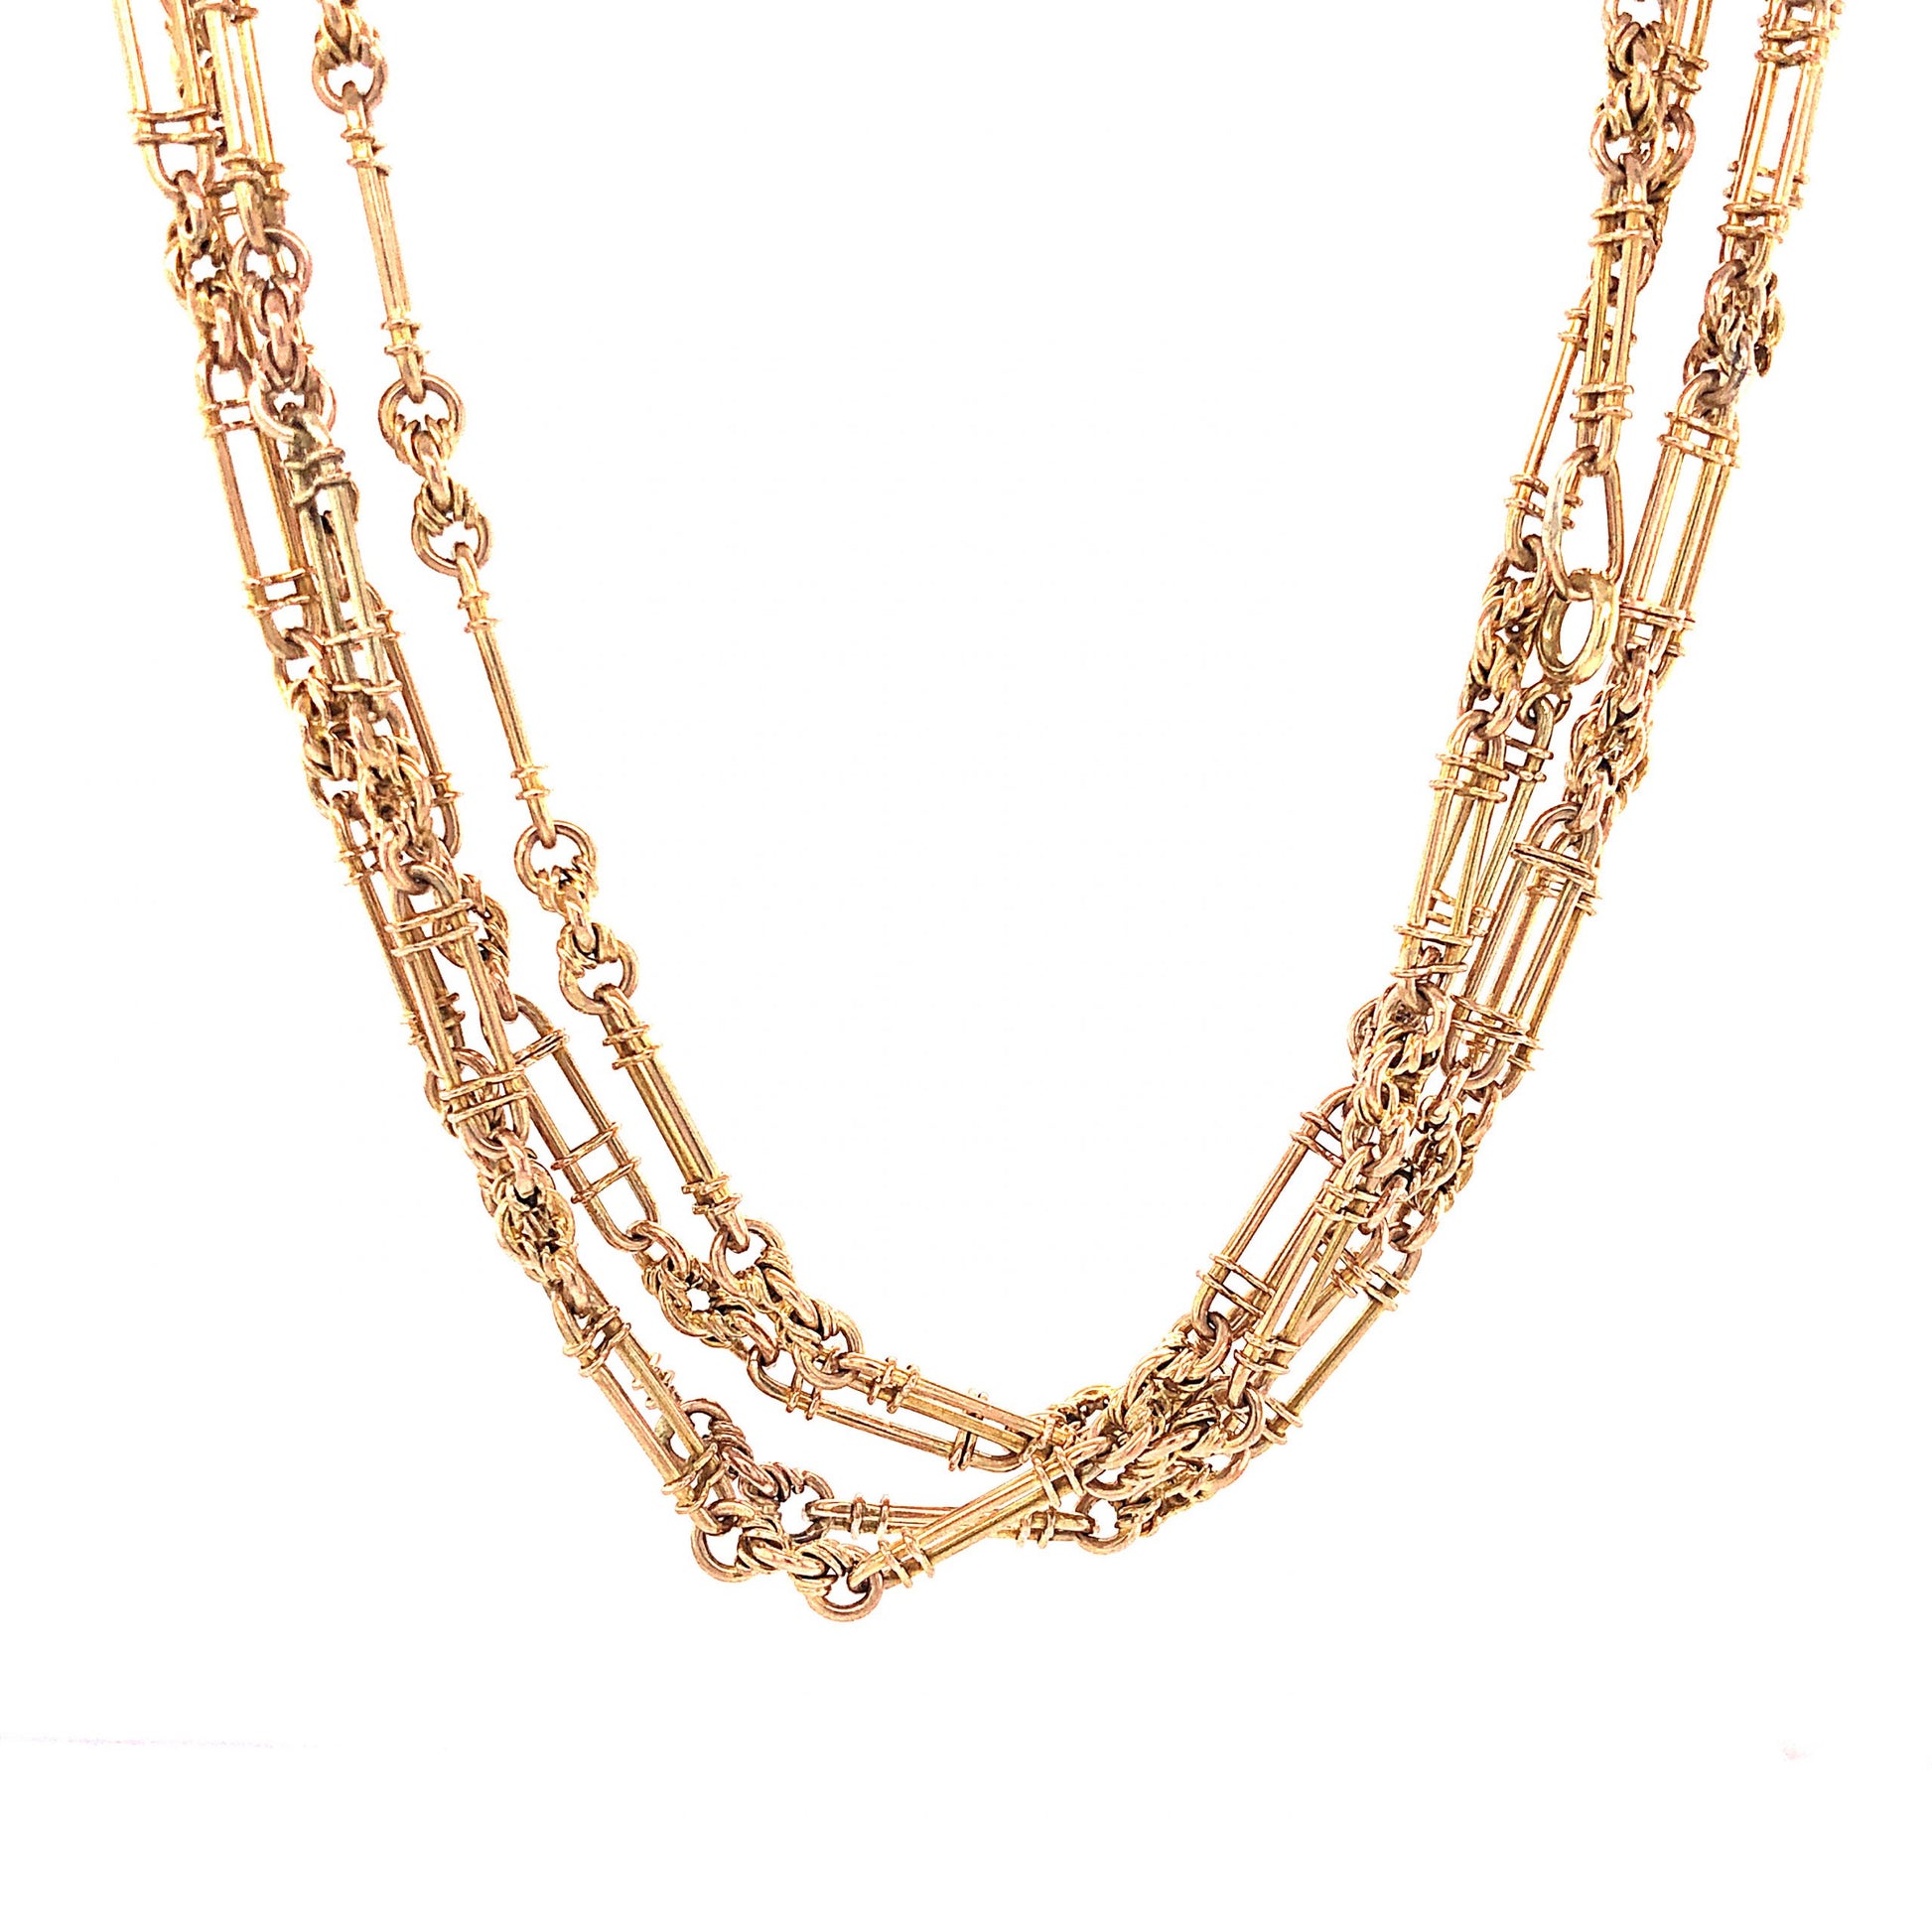 Victorian Paperclip Chain Necklace in 14k Yellow Gold